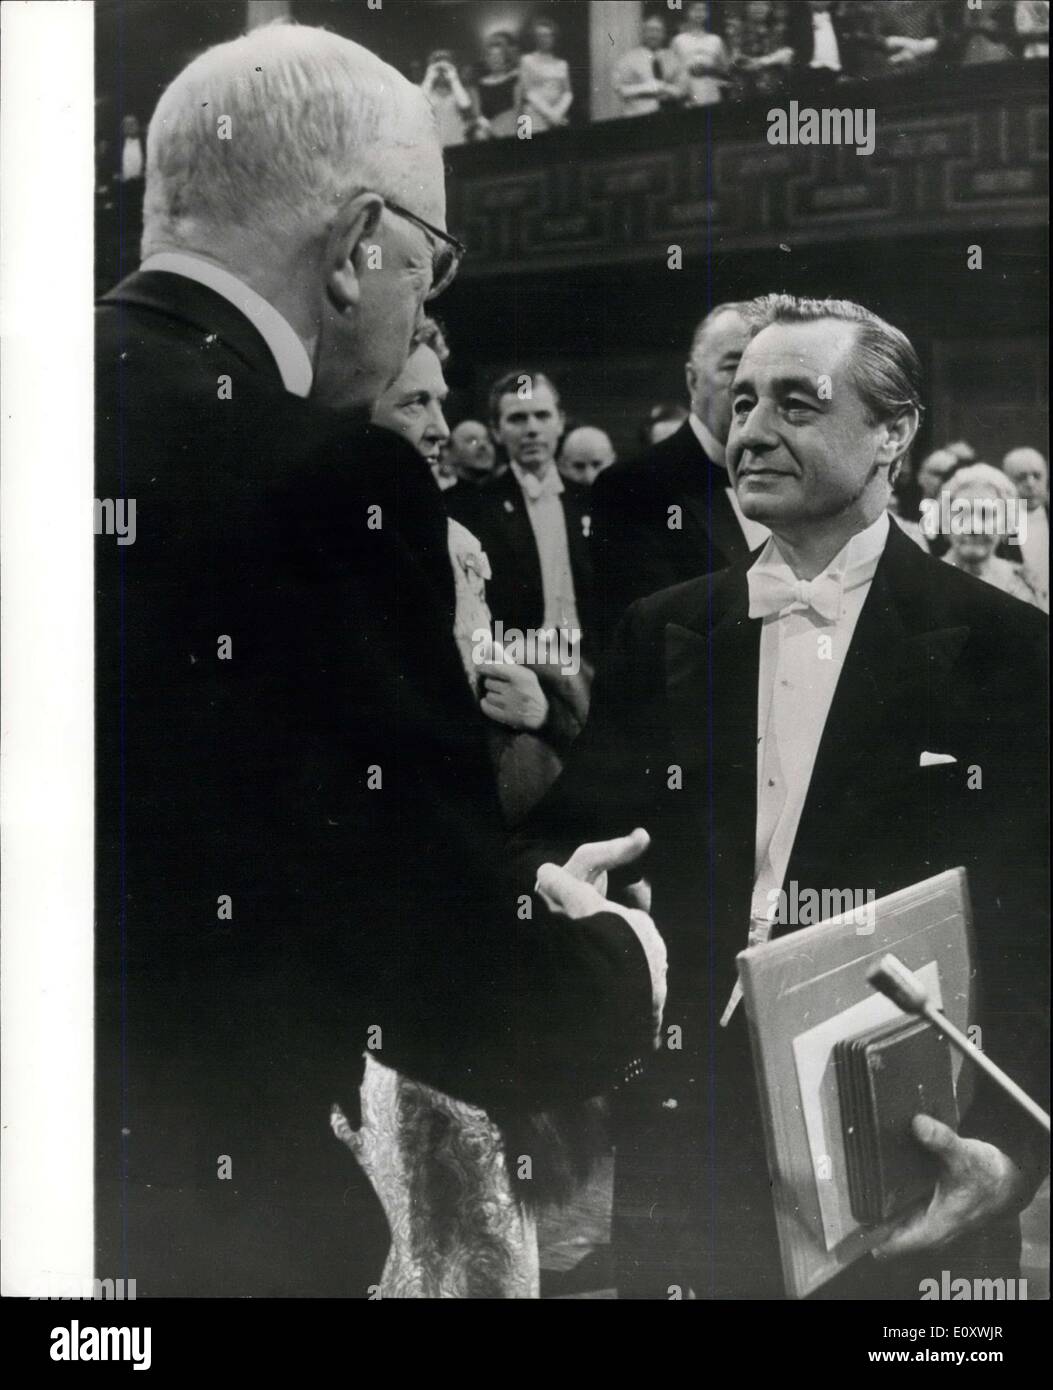 Dec. 12, 1967 - Nobel Prize Awards in Stockholm: At a ceremony in the Concert Hall, Stockholm, on Sunday (Dec 10), King Gustav Adolf of Sweden, presented this year's Nobel Prizes. The ceremony was held on the 71st. Anniversary of the death of Alfred Nobel, the inventor and industrialist, Photo shows Prof. George Porter ( Britain), joint winner of the prize for chemistry - receiving the prize from King Gustav Adolf of Sweden. Stock Photo